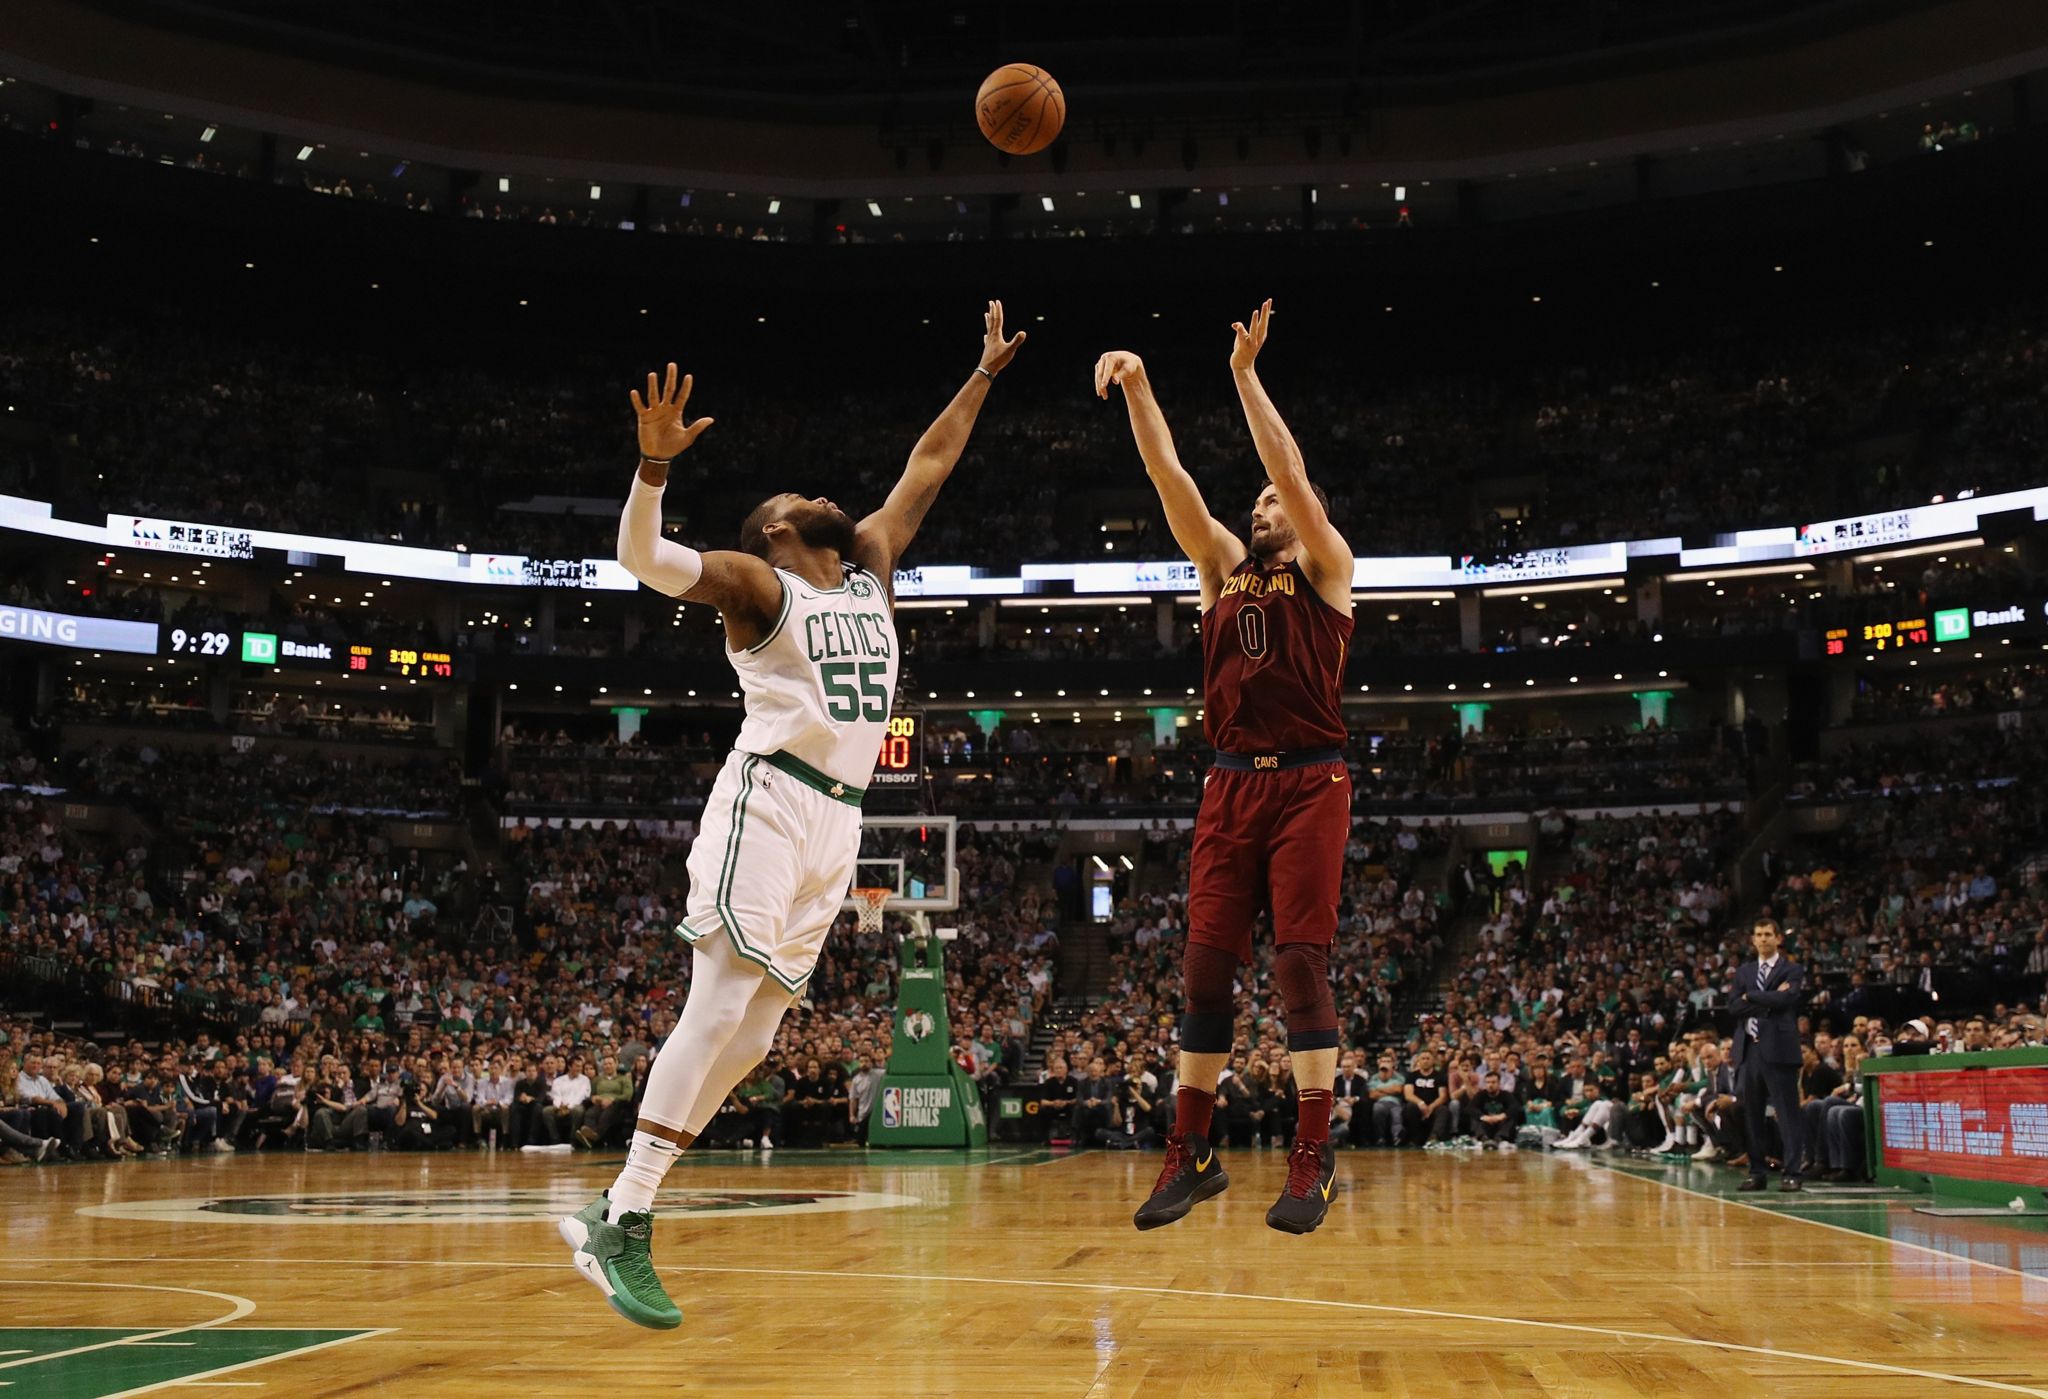 Kevin Love #0 of the Cleveland Cavaliers shoots the ball against Greg Monroe #55 of the Boston Celtics in the first half during Game Two of the 2018 NBA Eastern Conference Finals at TD Garden on May 15, 2018 in Boston, Massachusetts.